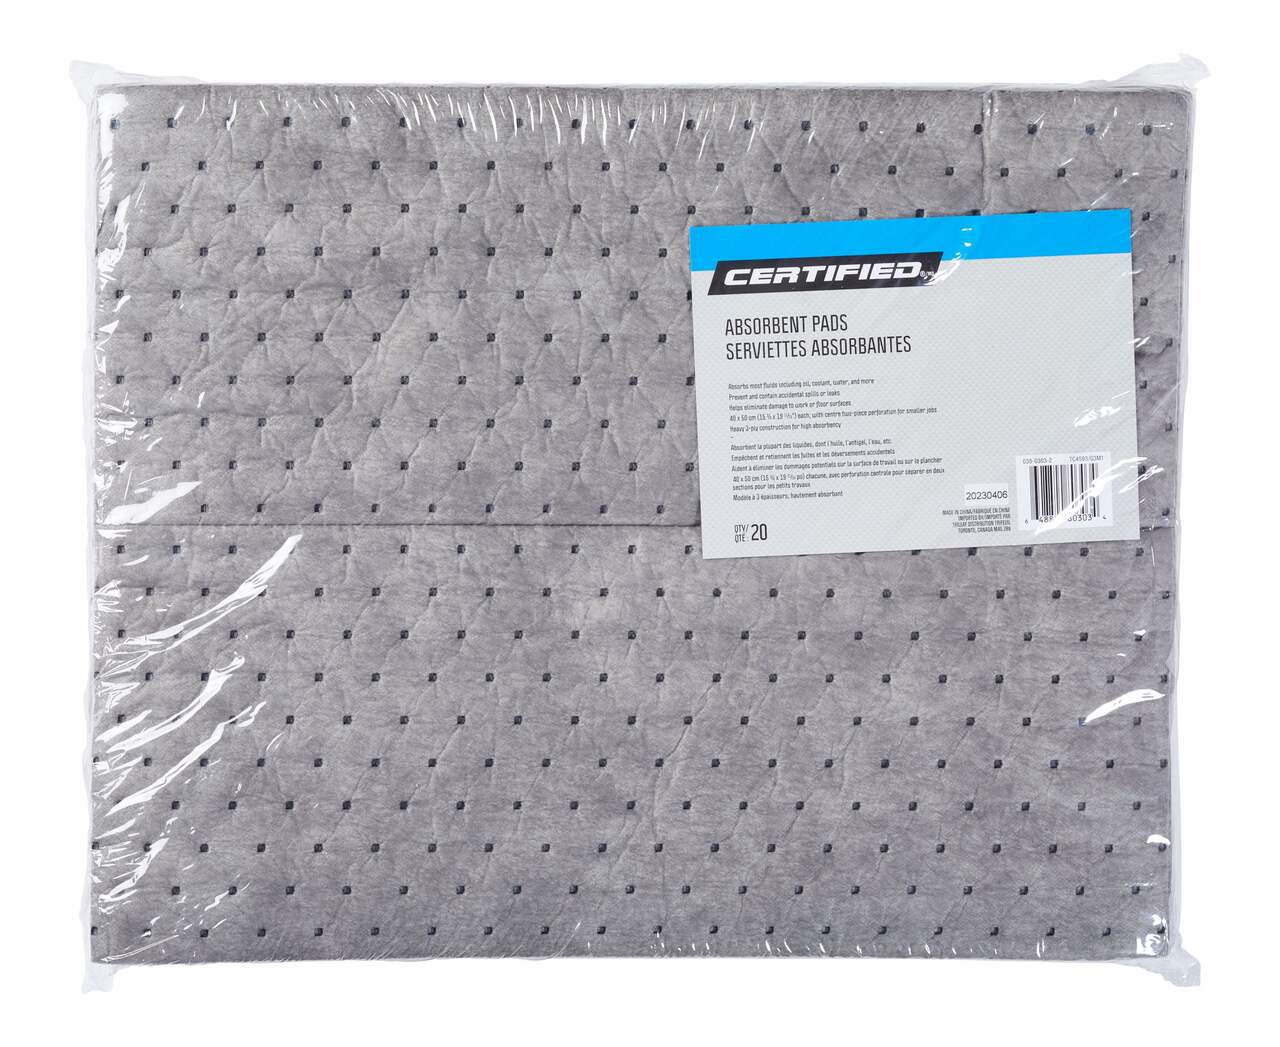 Certified Automotive Oil Absorbent Pads, 20-pk